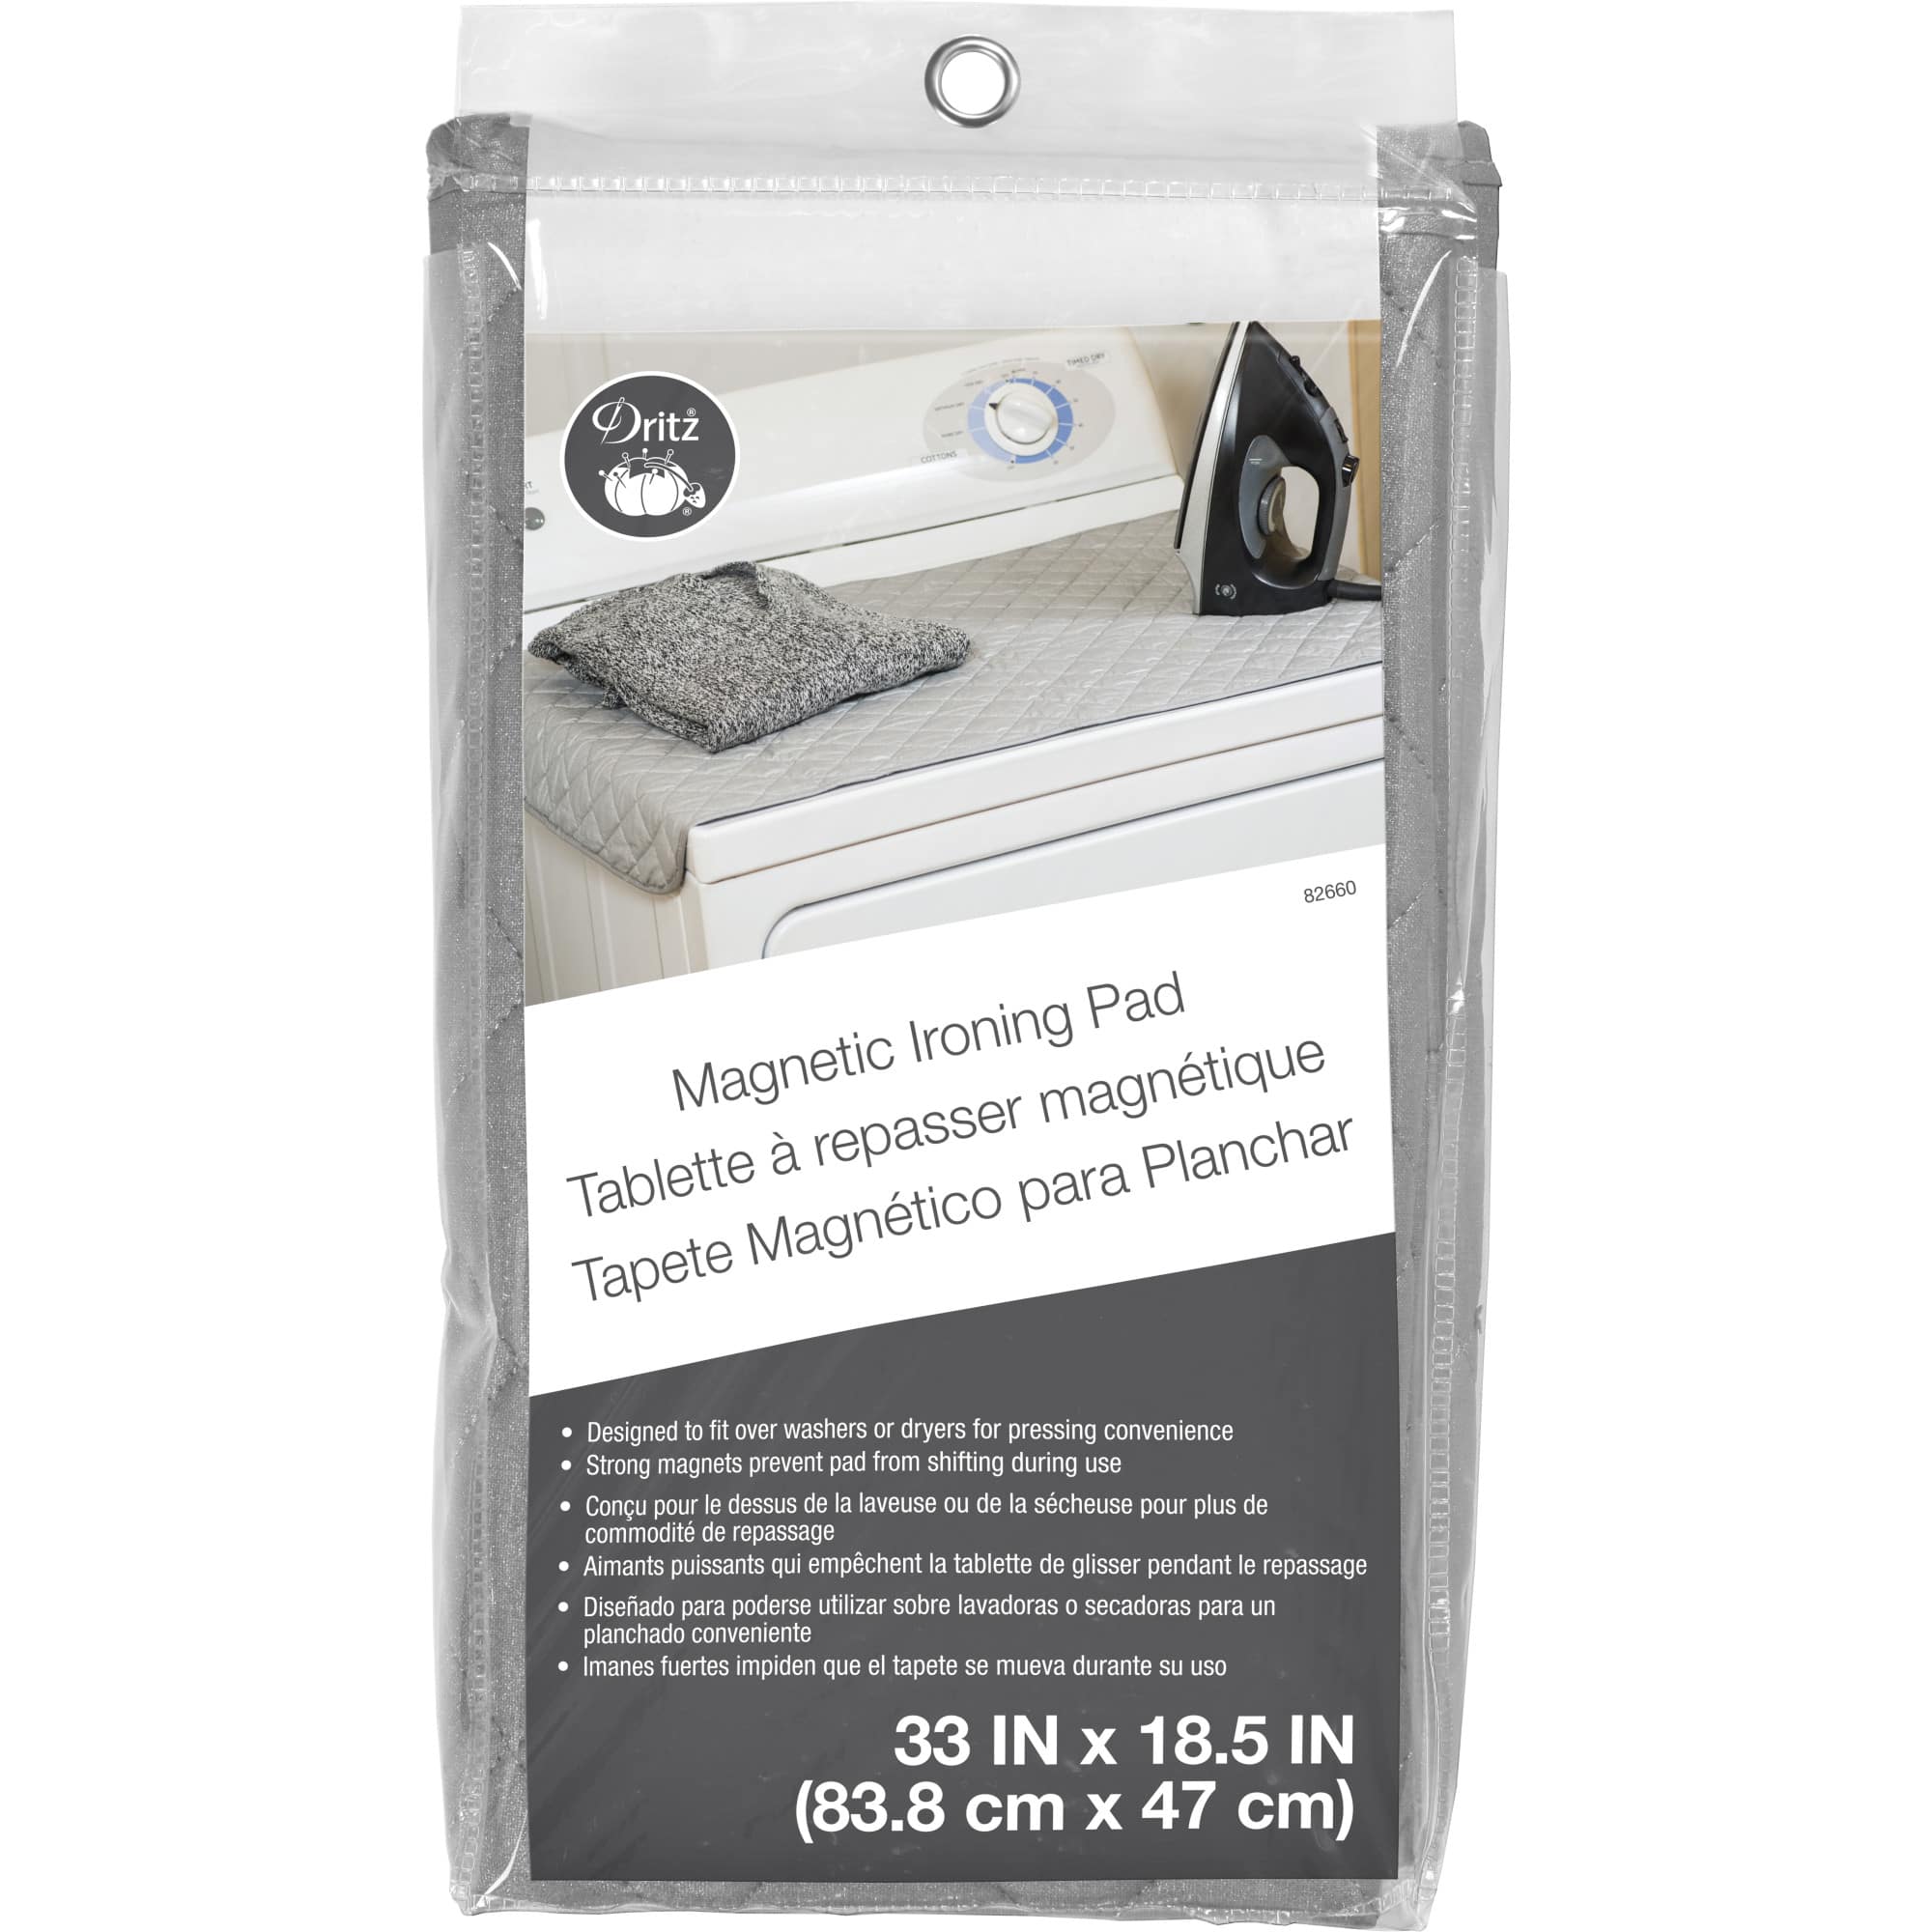 Dritz Clothing Care Magnetic Ironing Pad 33inX18.5in